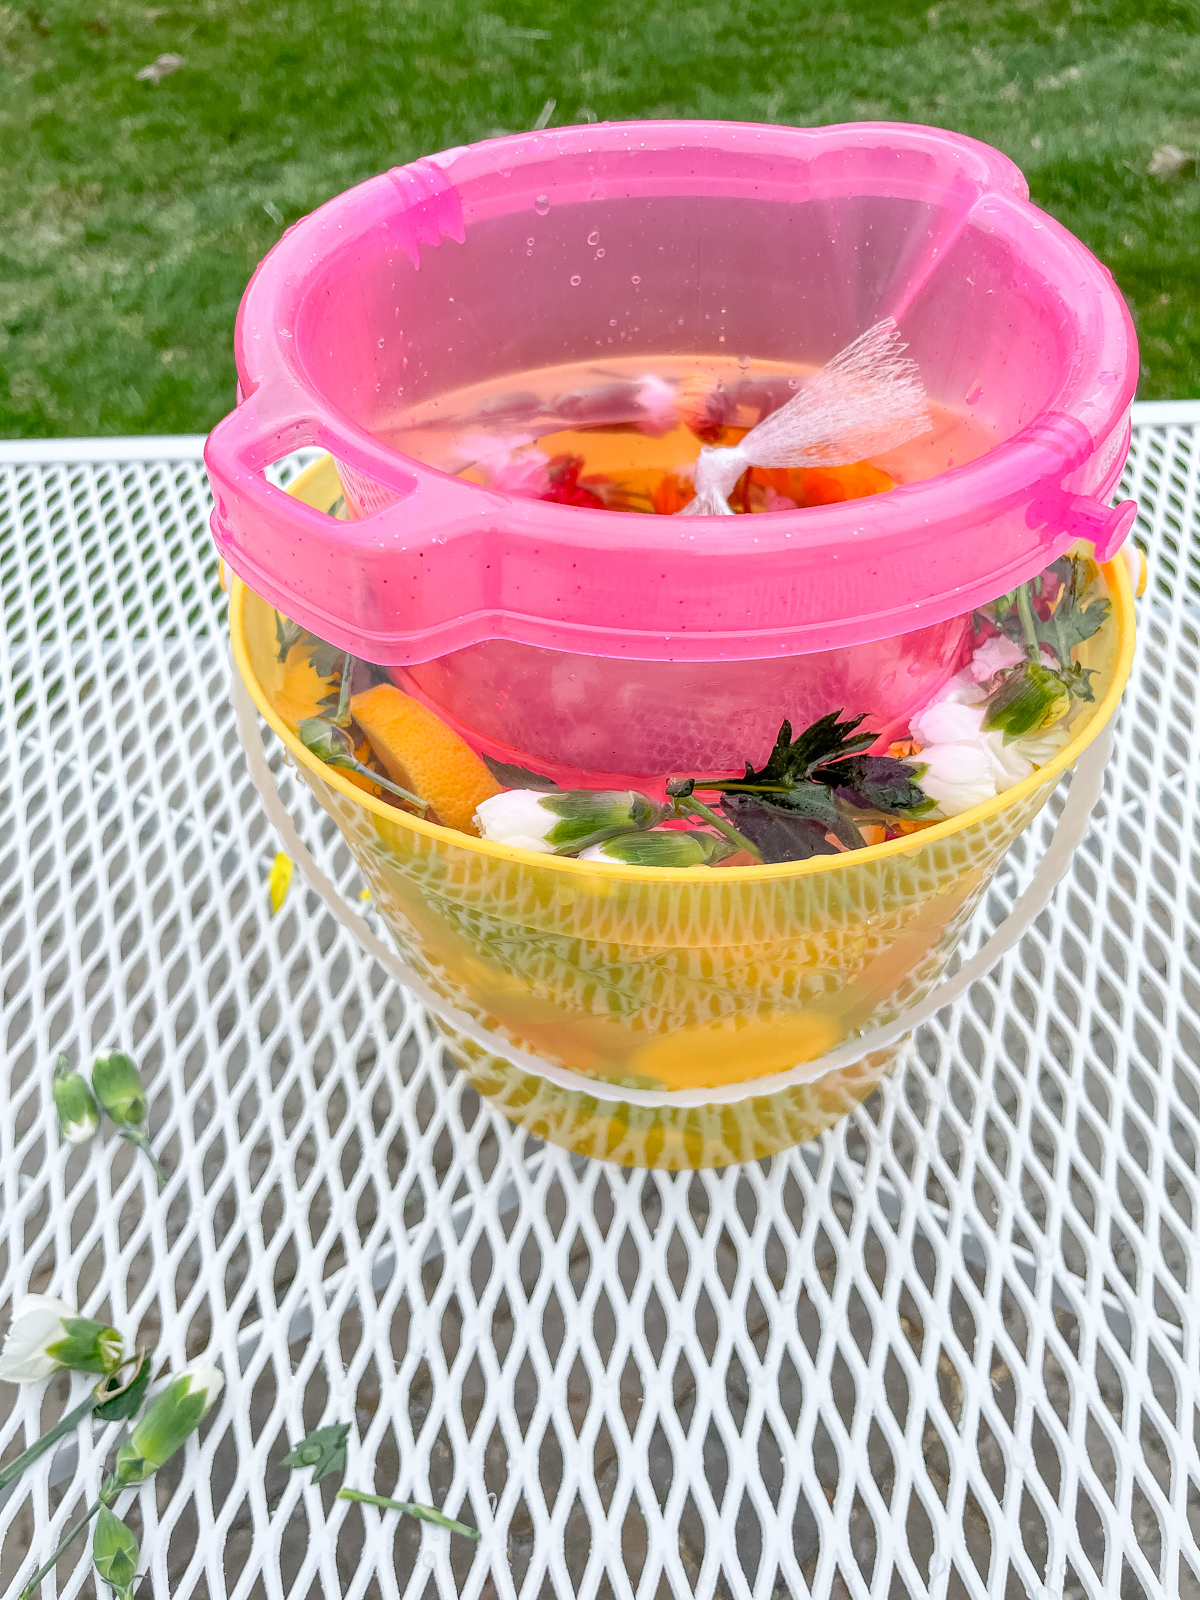 HOW TO MAKE A SUMMER ICE BUCKET